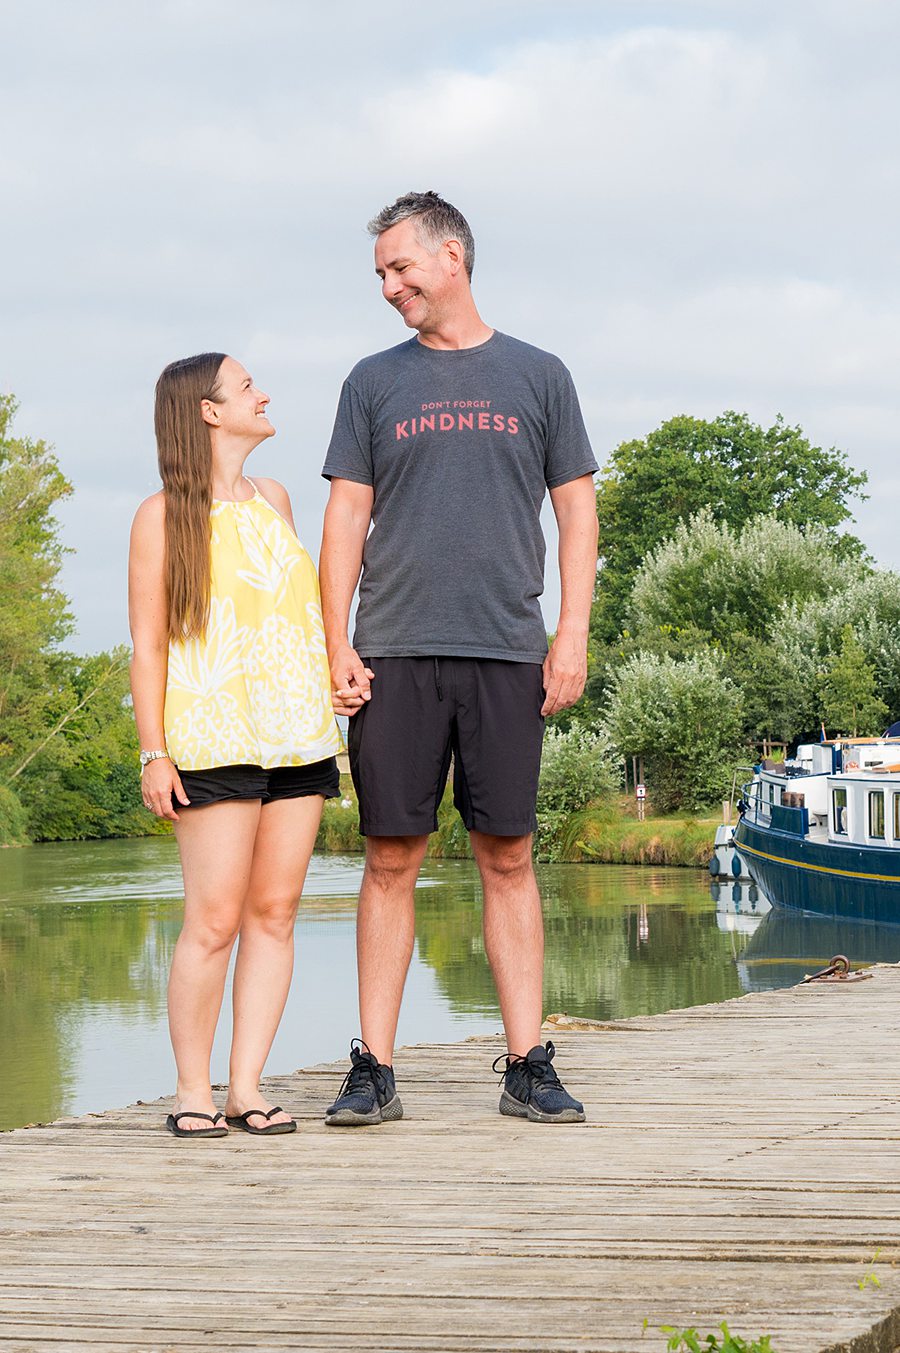 Couple looking at each other on a dock in front of a canal and barge cruise ship.